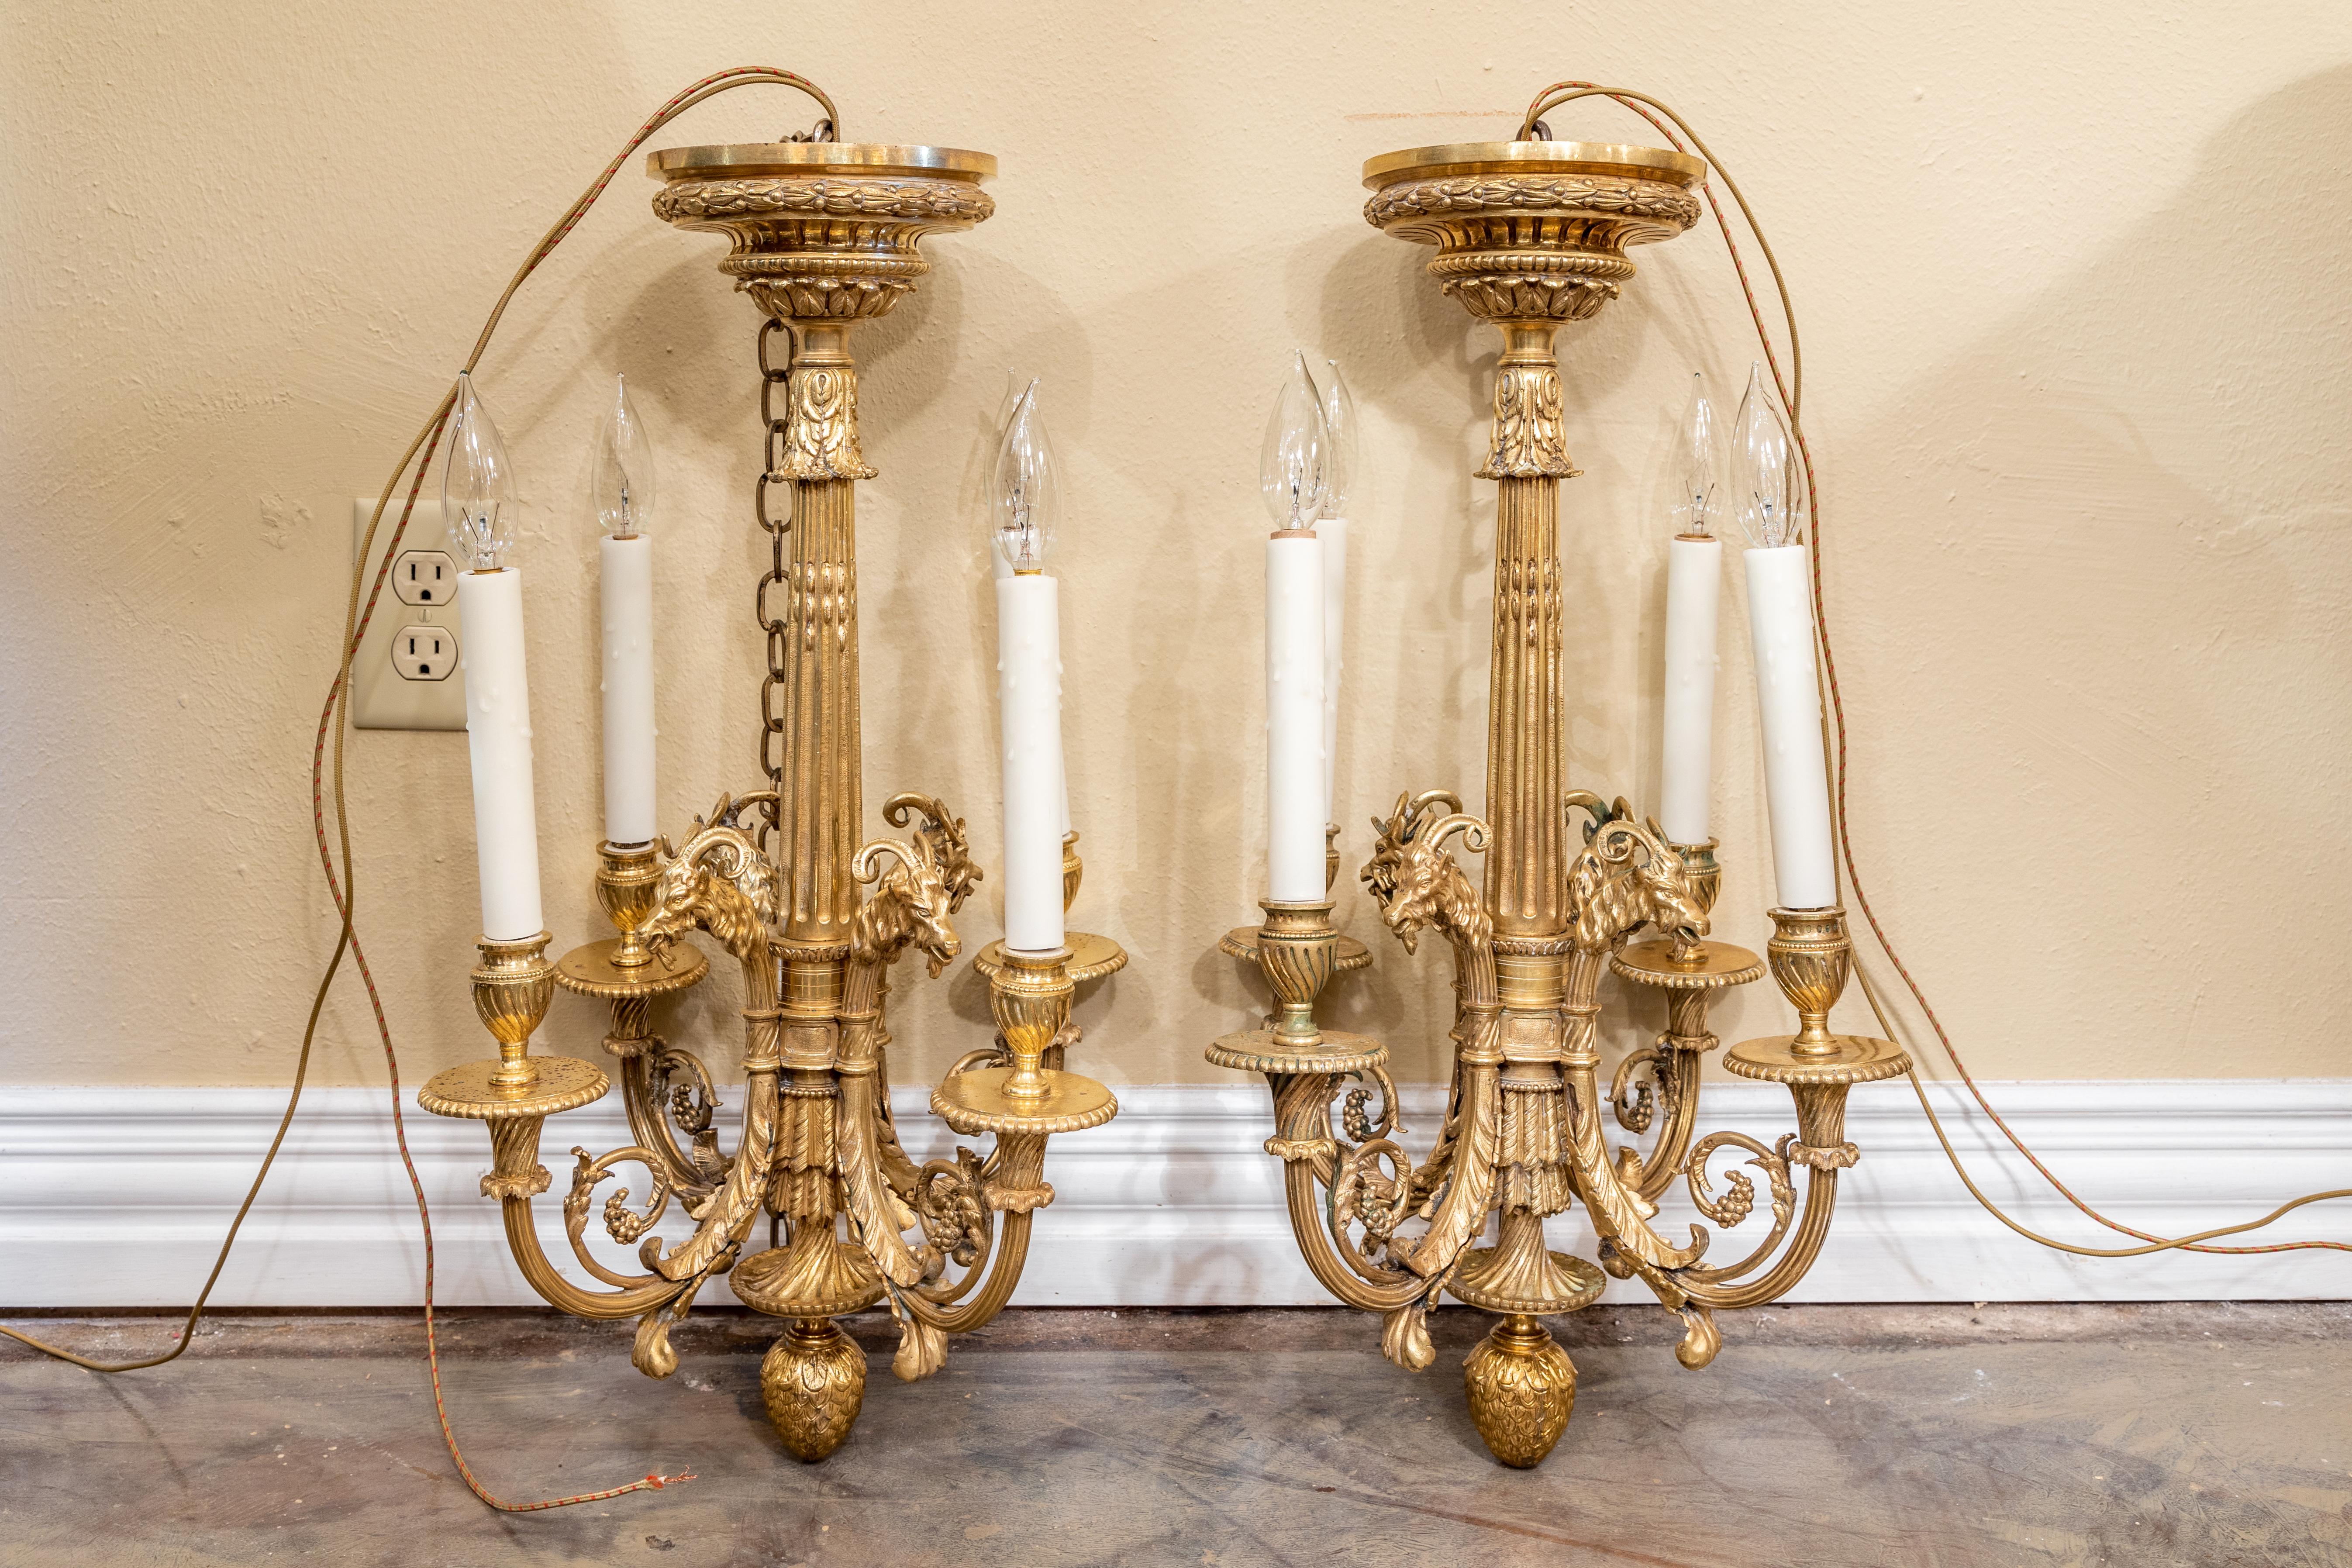 French Fine Rare Pair of 19th C Louis XVI Gilt Bronze Chandeliers, Rams Head Design For Sale